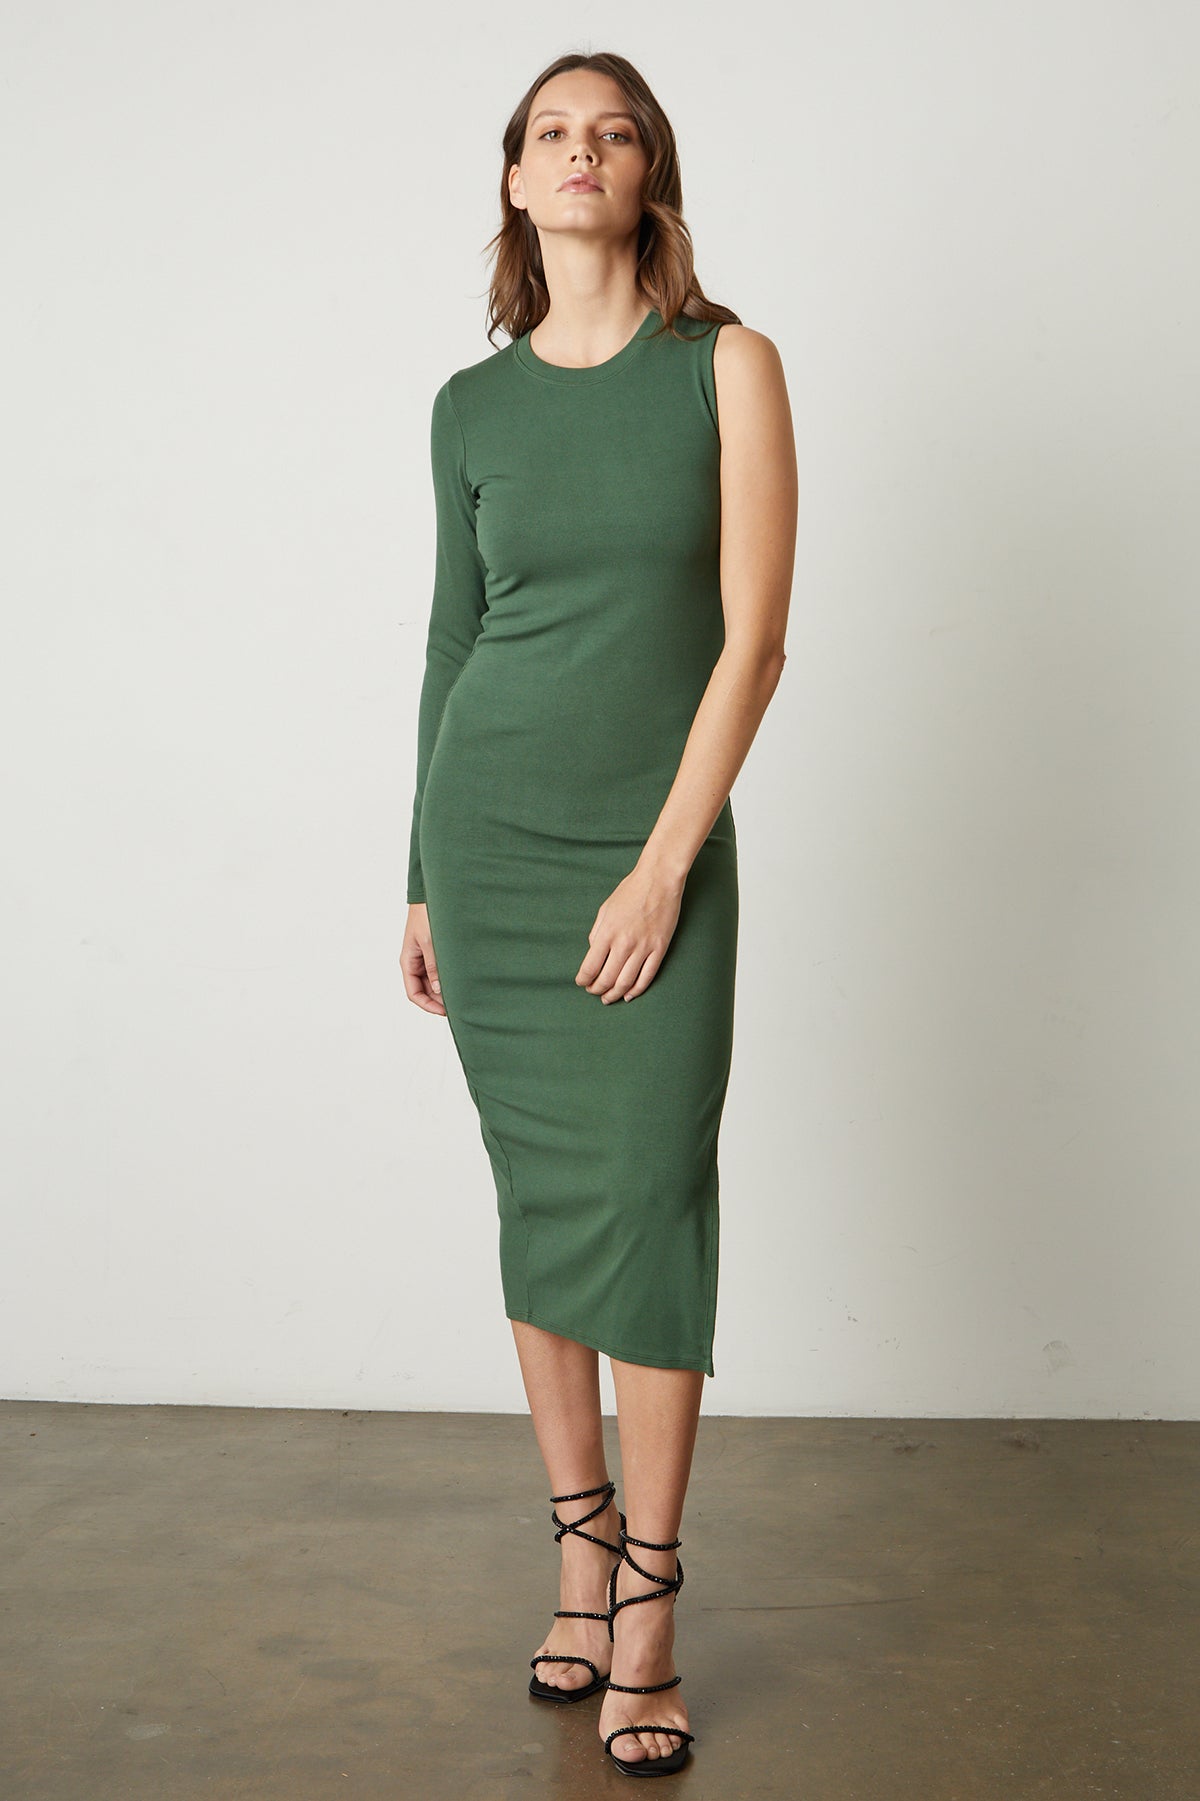 Trina Asymmetrical Midi Dress in willow green full length front with black sandal heels-25669313528001